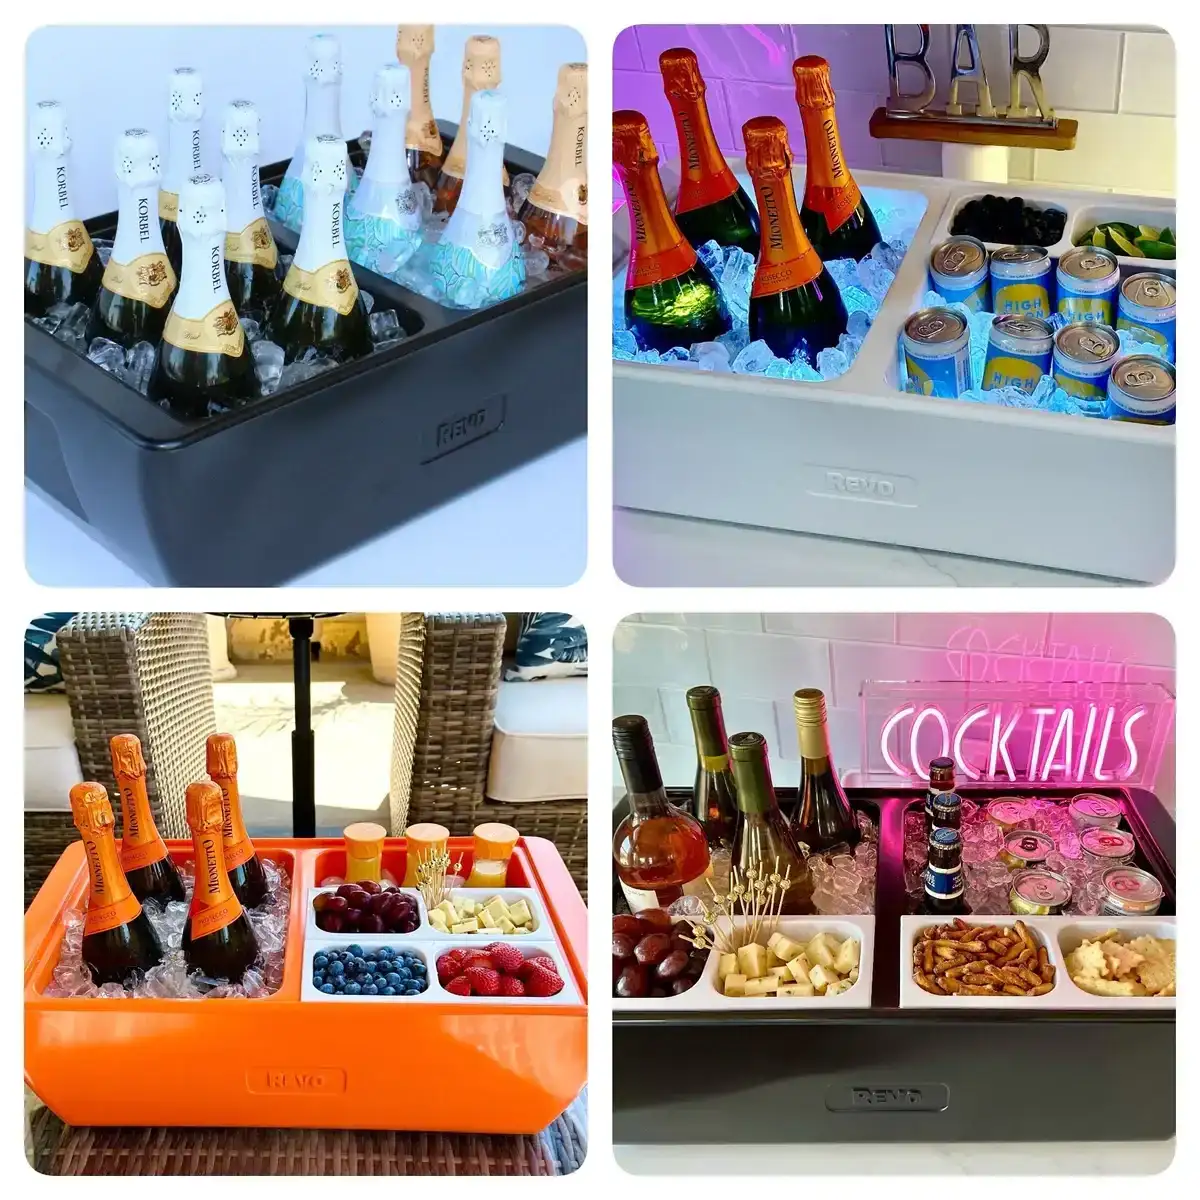 REVO Party Coolers are insulated for longer lasting ice and no condensation. Create your own all-in-one bar station set up from Mimosa bars to Bloody Mary bars.